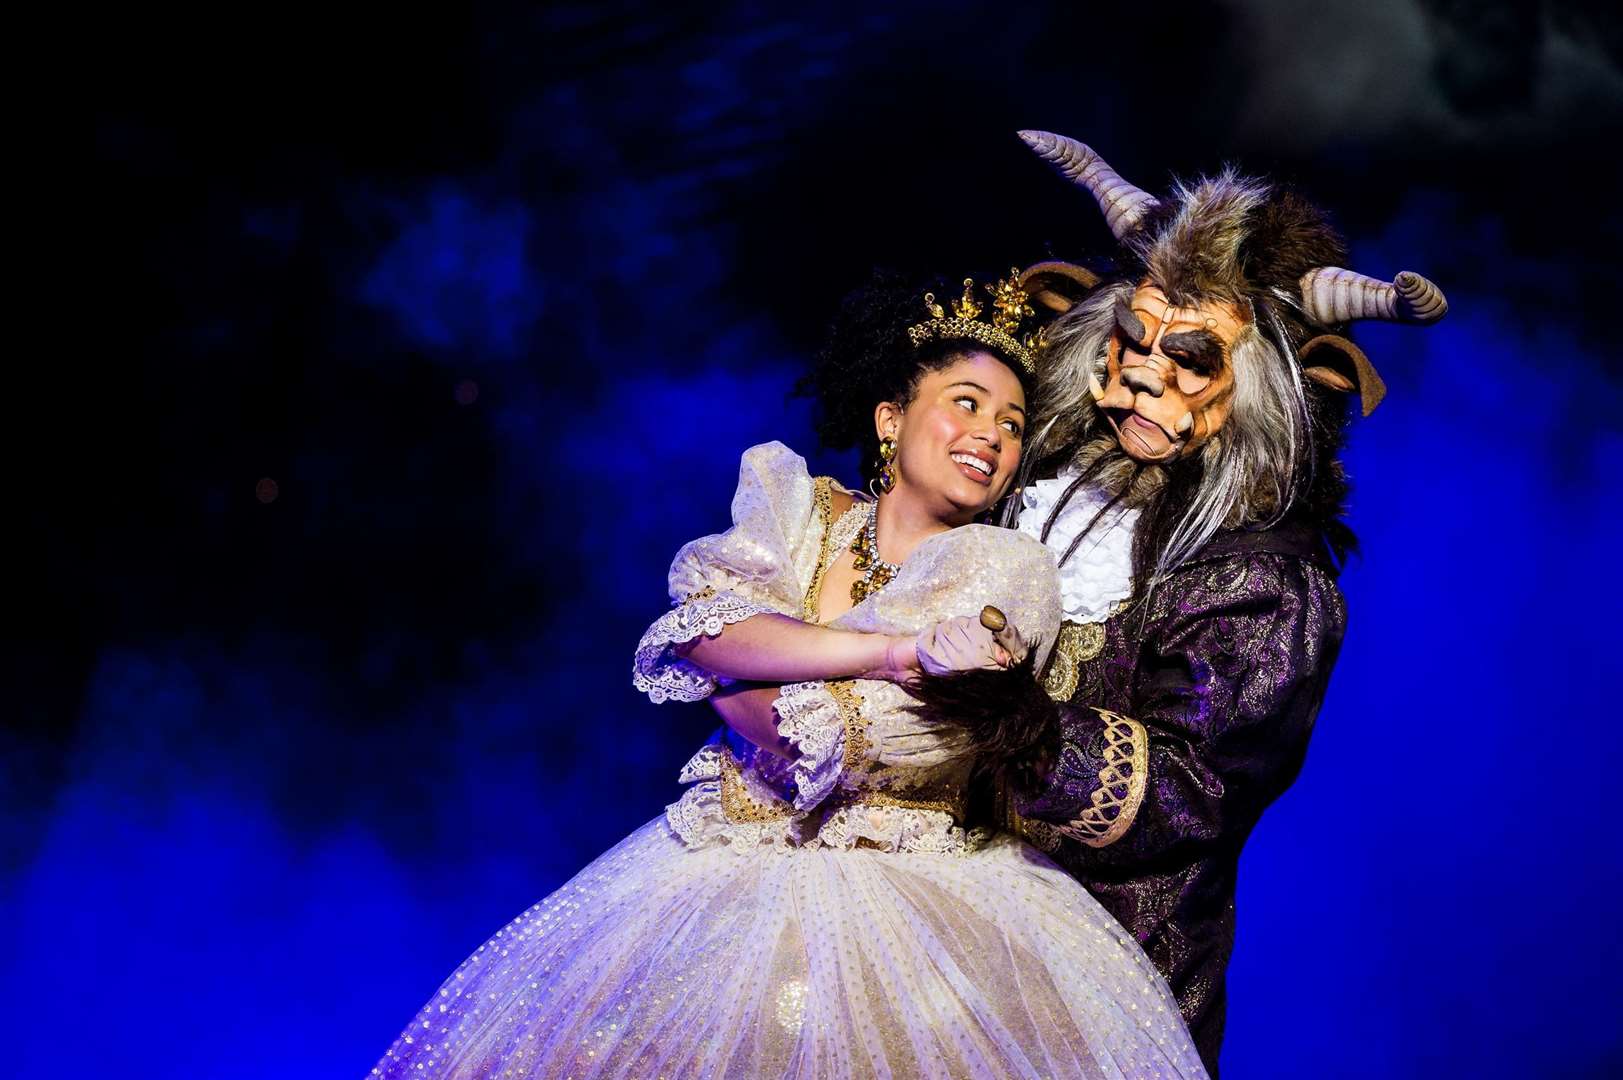 Beauty and the Beast runs at HMT until January.